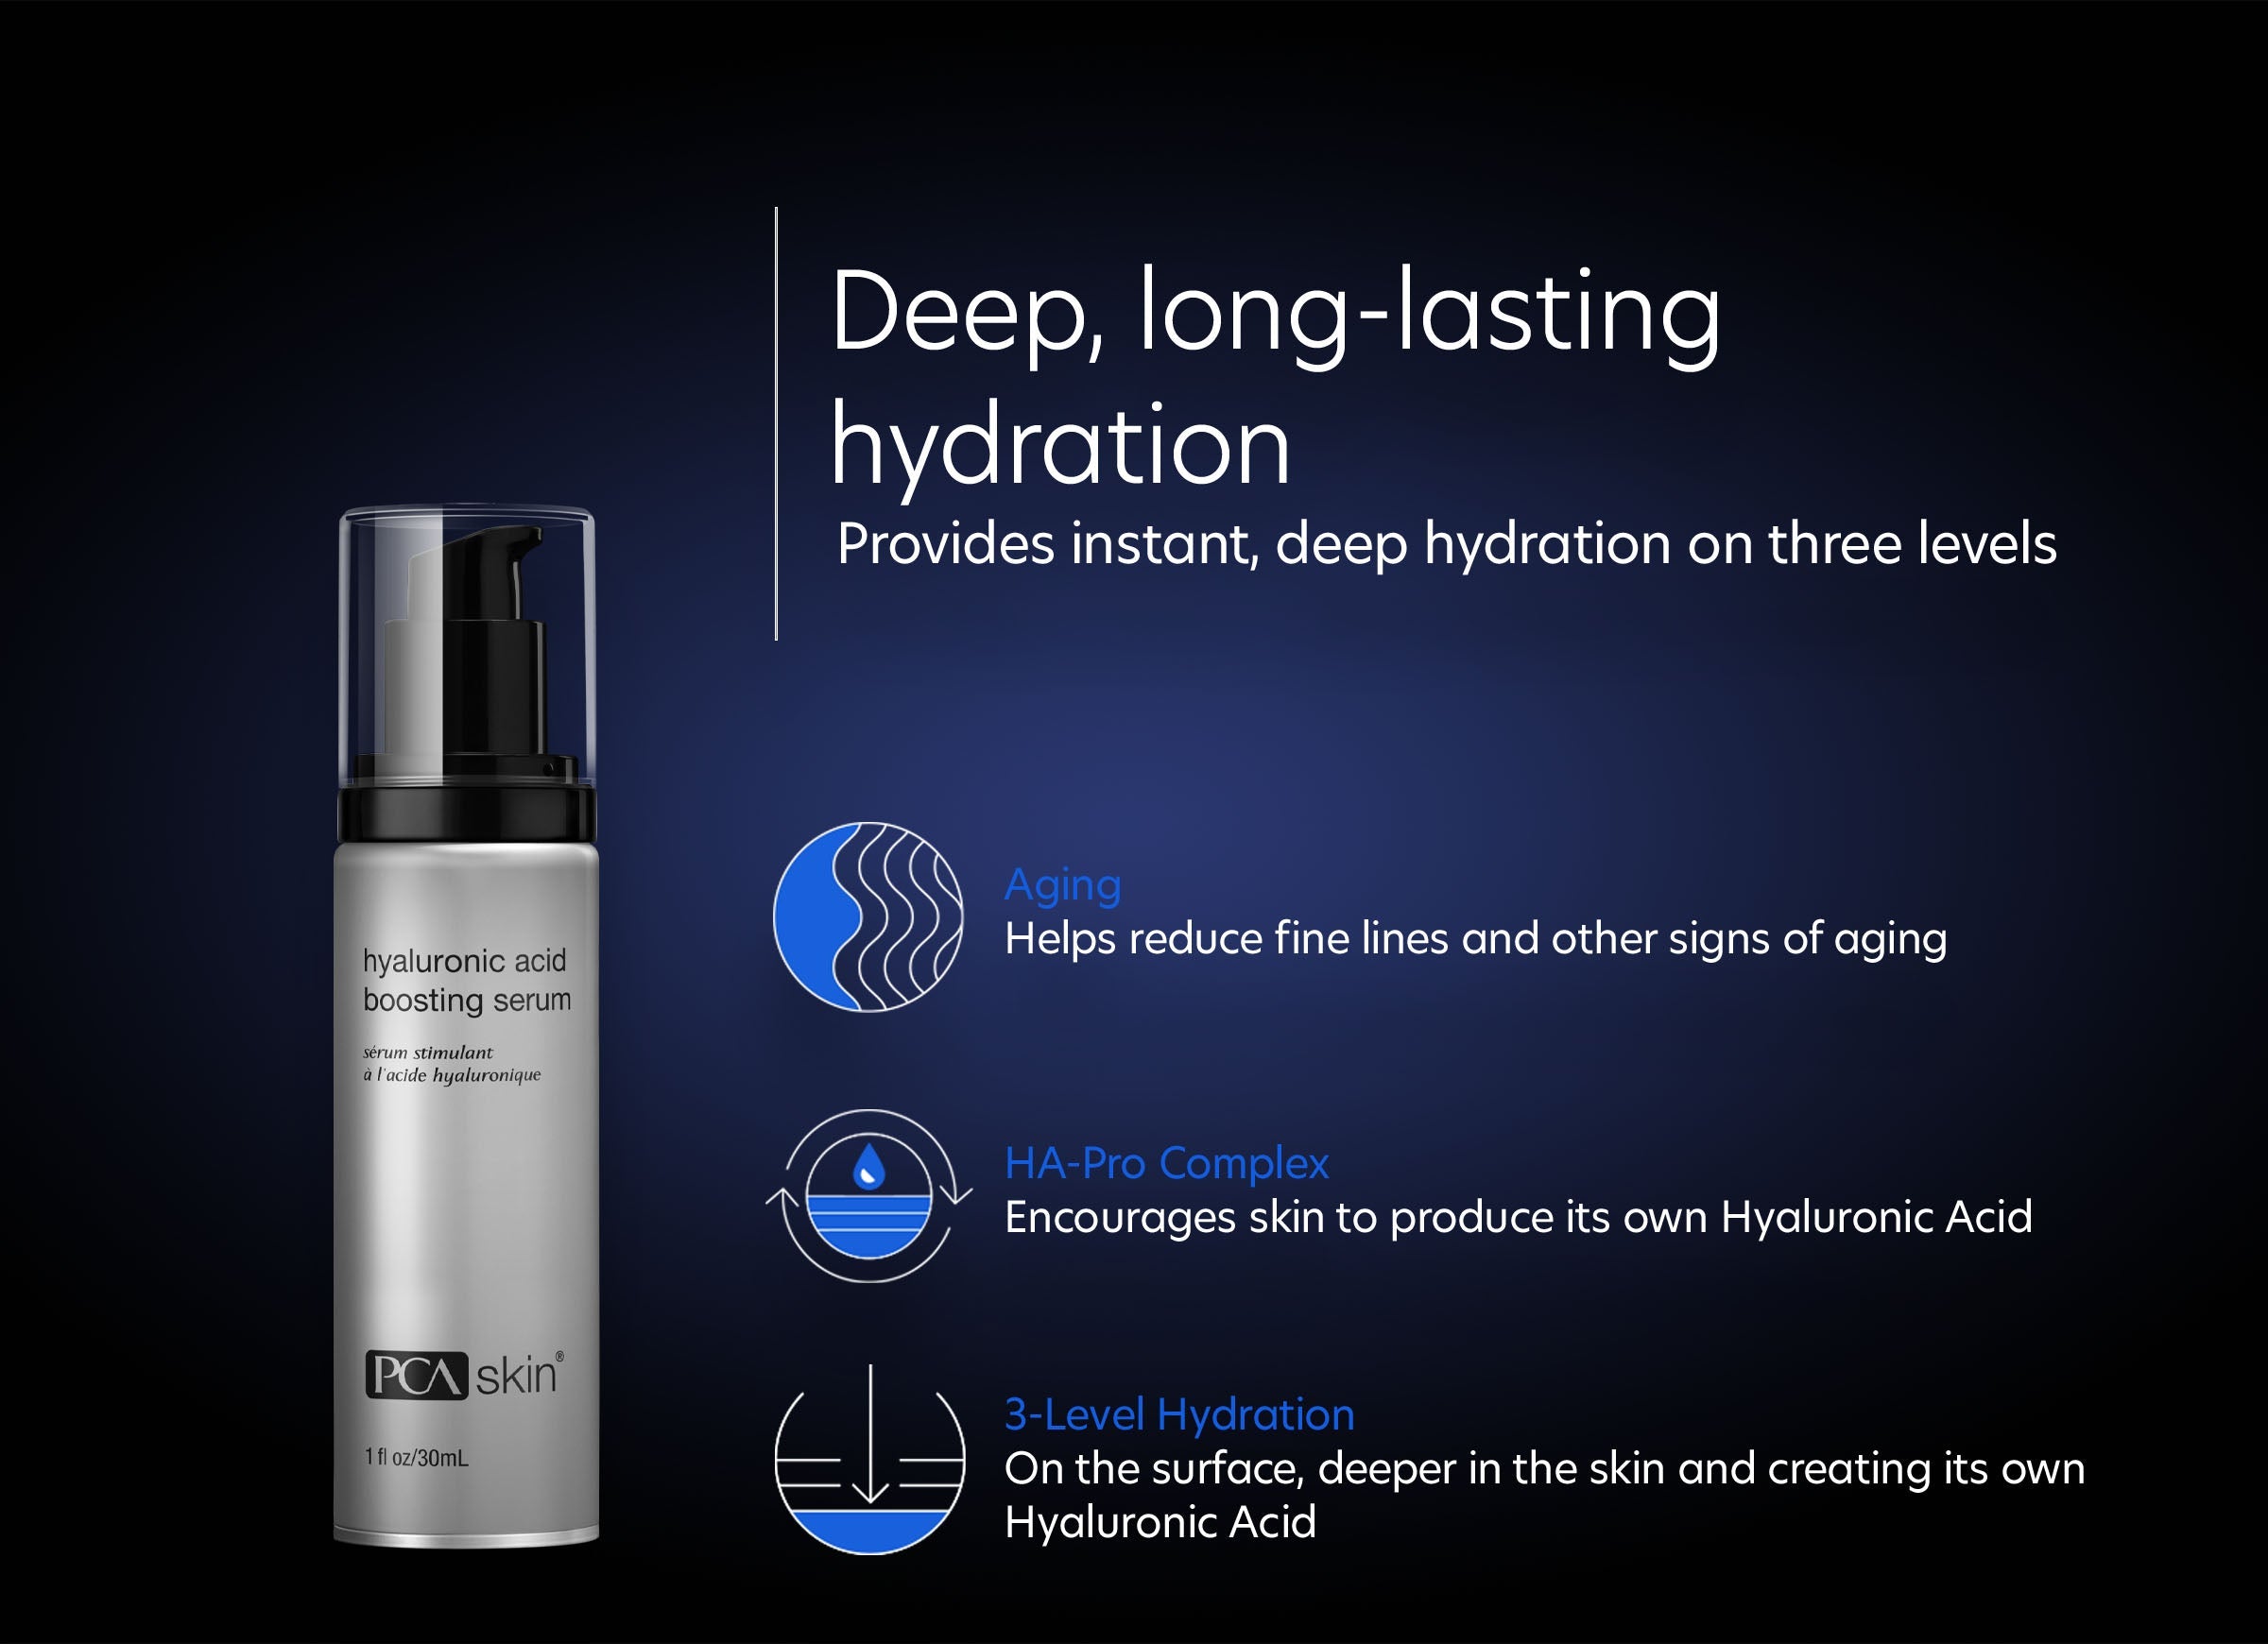 Hyaluronic Acid Boosting Serum - Deep, long-lasting Hydration. Provides instant, deep hydration on three levels